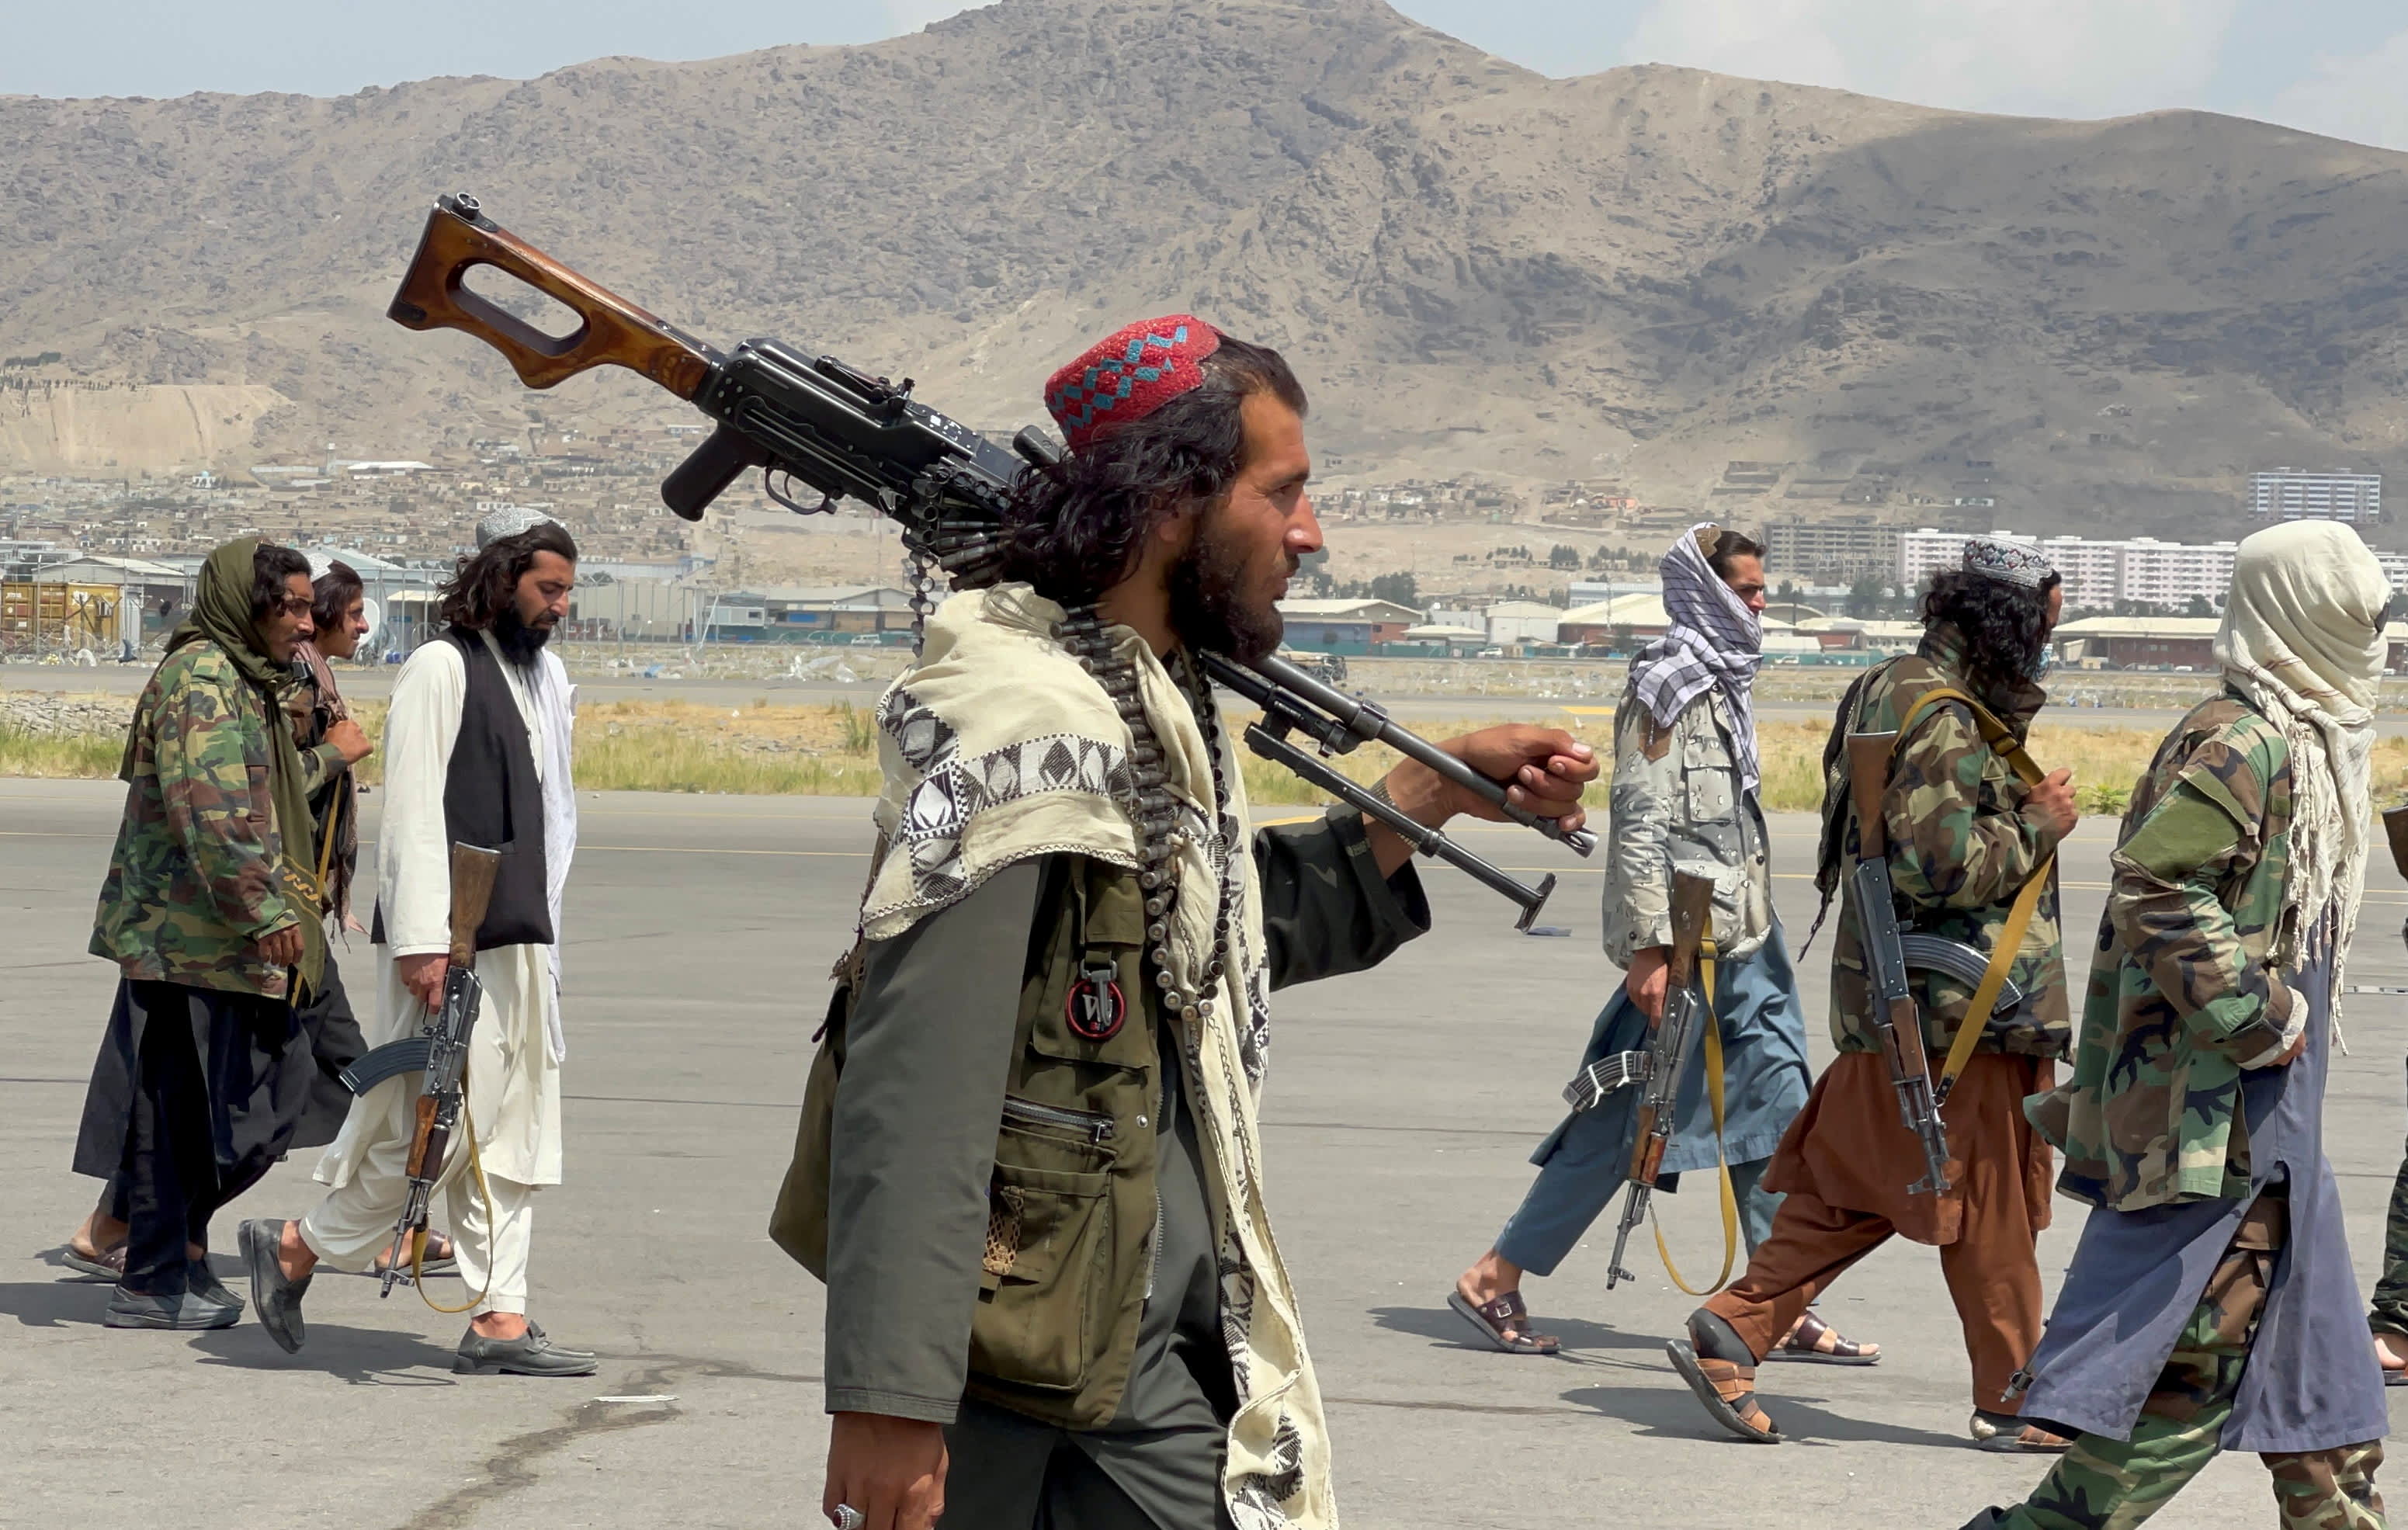 Terrorism will increase under Afghanistan’s newly appointed Taliban government, experts warn